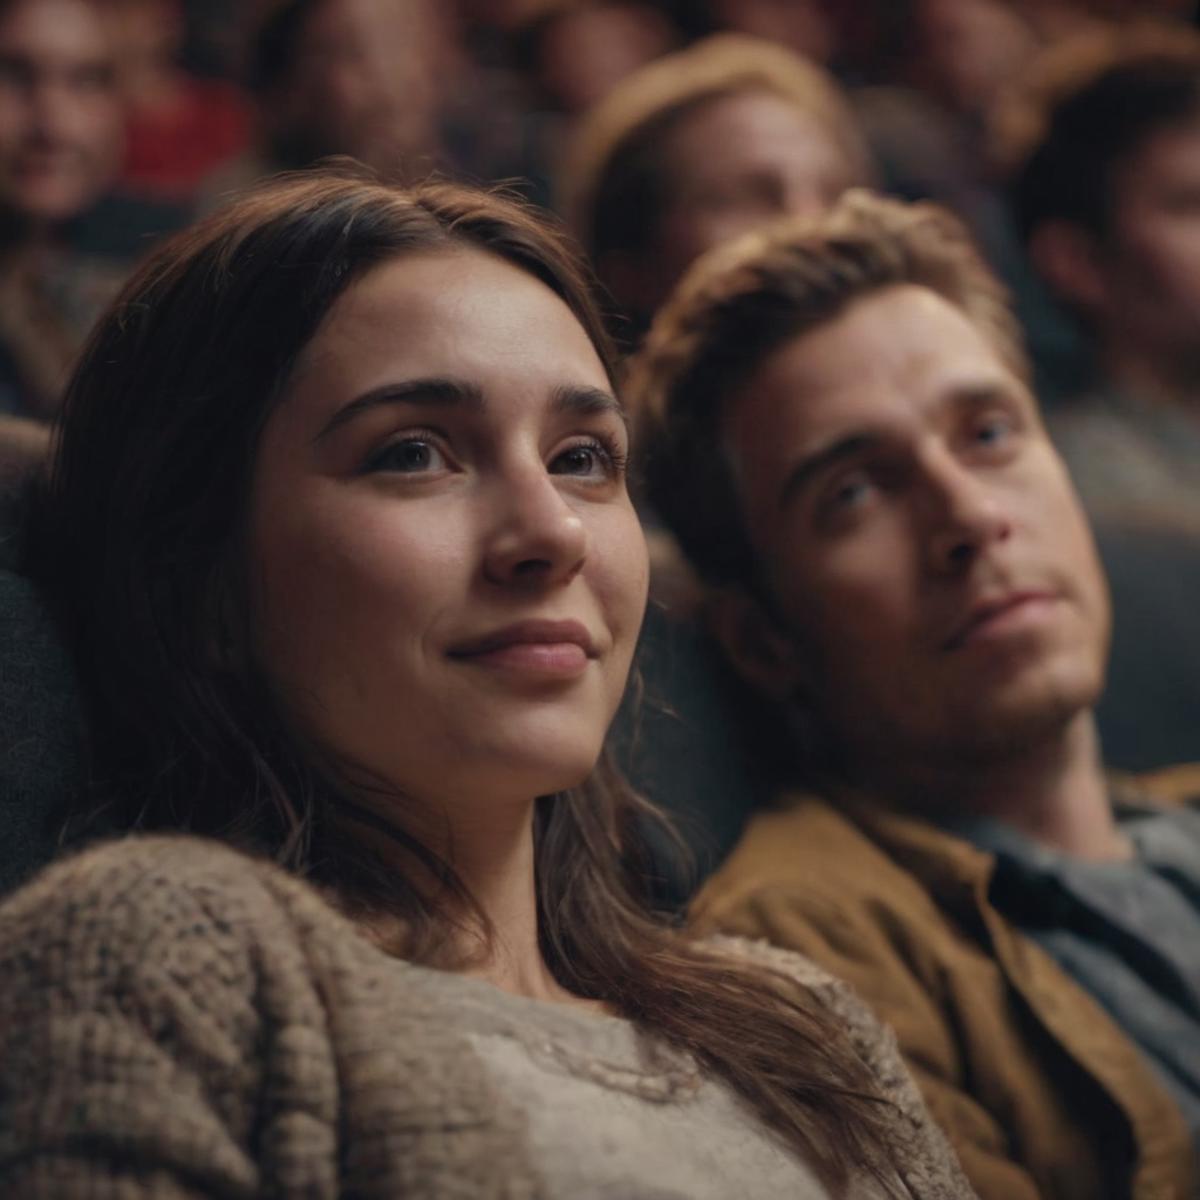 A man and a woman sitting together in a movie theater, smiling and enjoying the show.